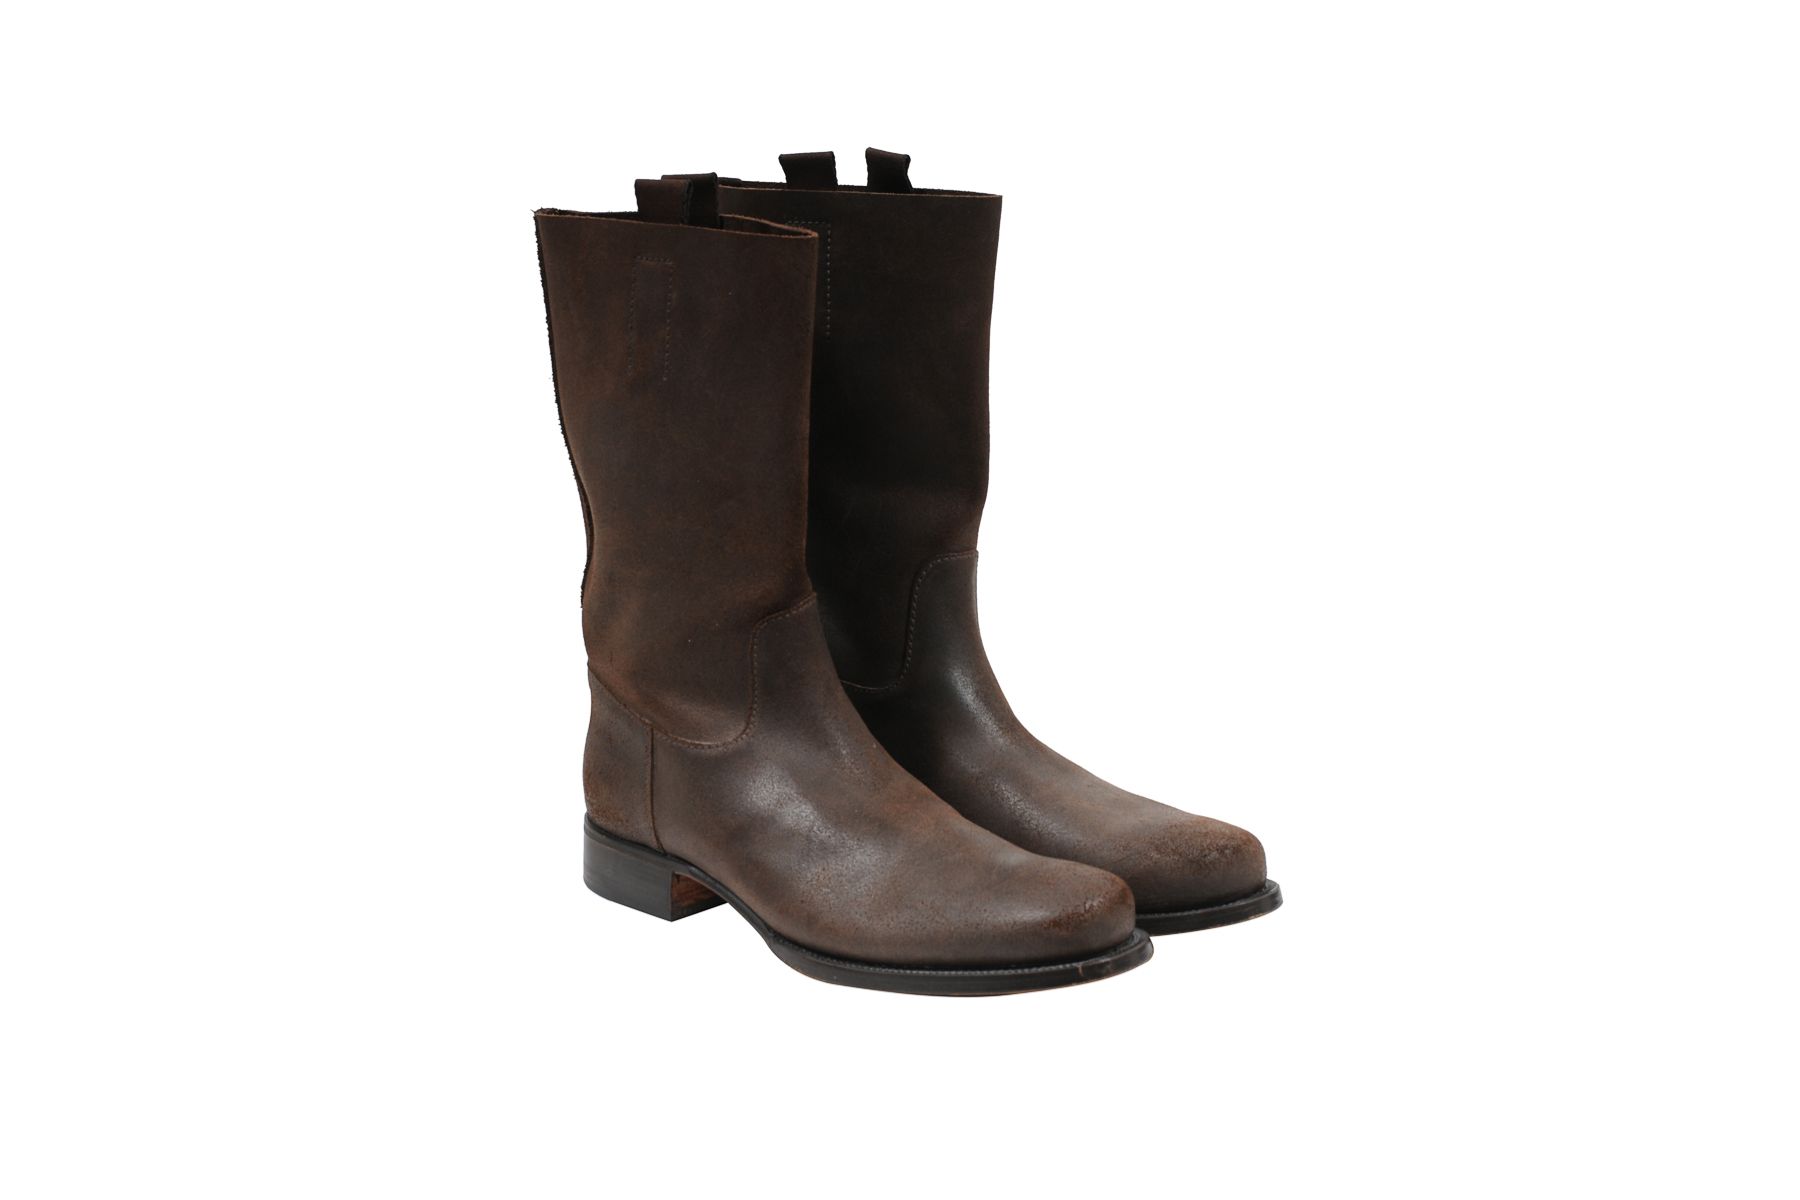 Pre-owned Prada Brown Leather Western Moto Riding Boots